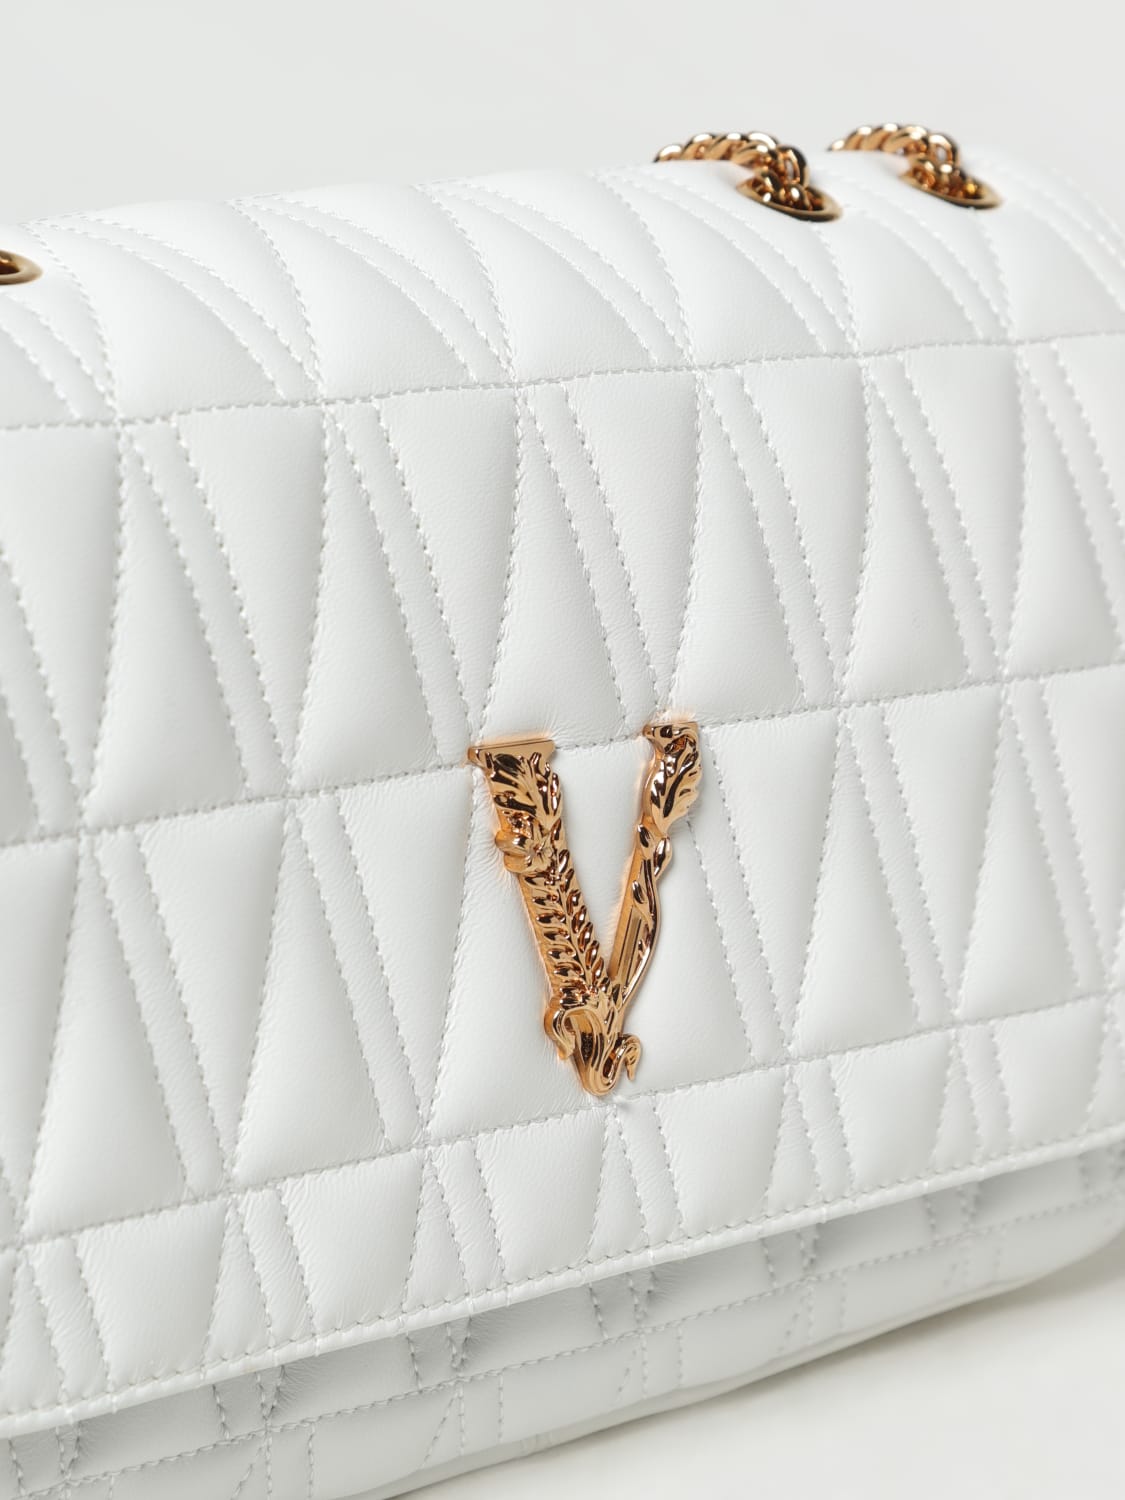 VERSACE: Virtus bag in quilted leather - White  Versace shoulder bag  DBFH822D2NTRT online at